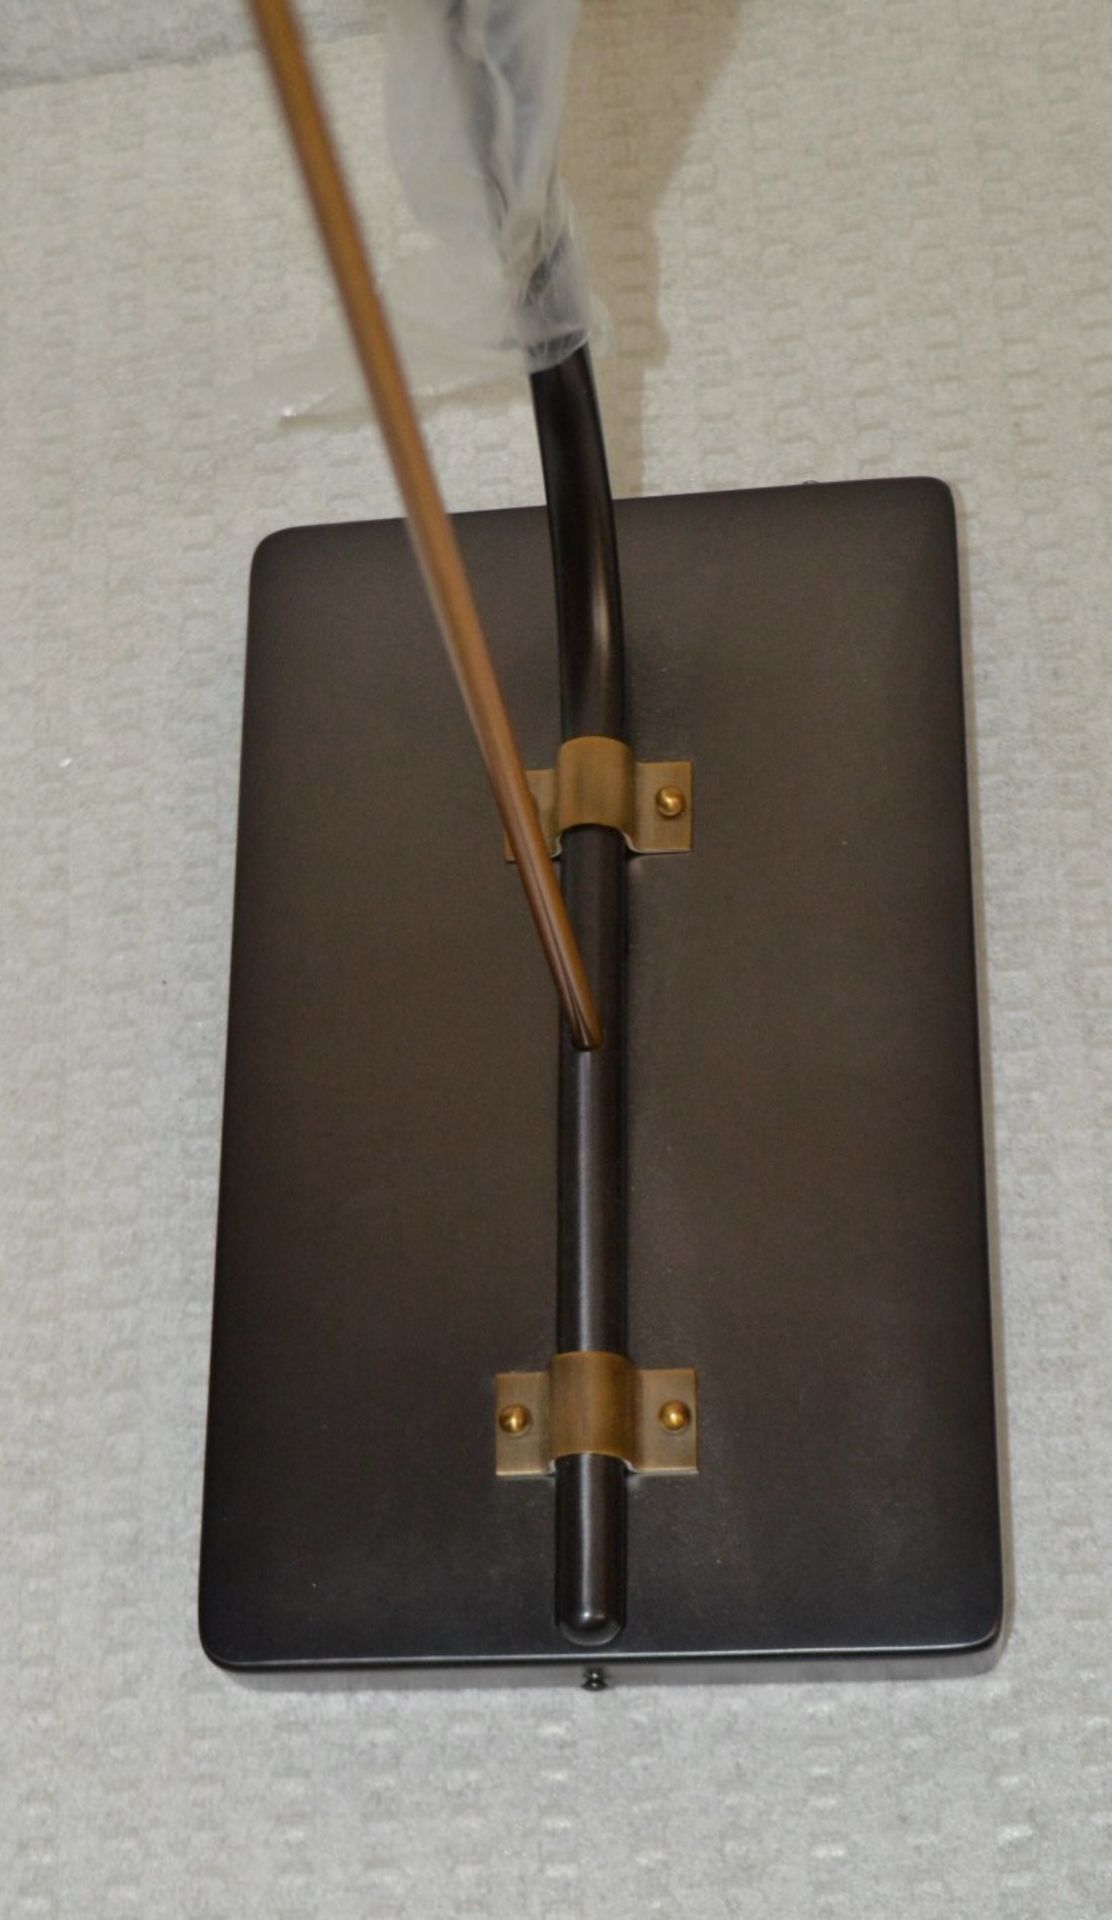 1 x CHELSOM Industrial Style Wall Light With A Back Plate In A Black Bronze Finish - Unused Boxed - Image 3 of 6